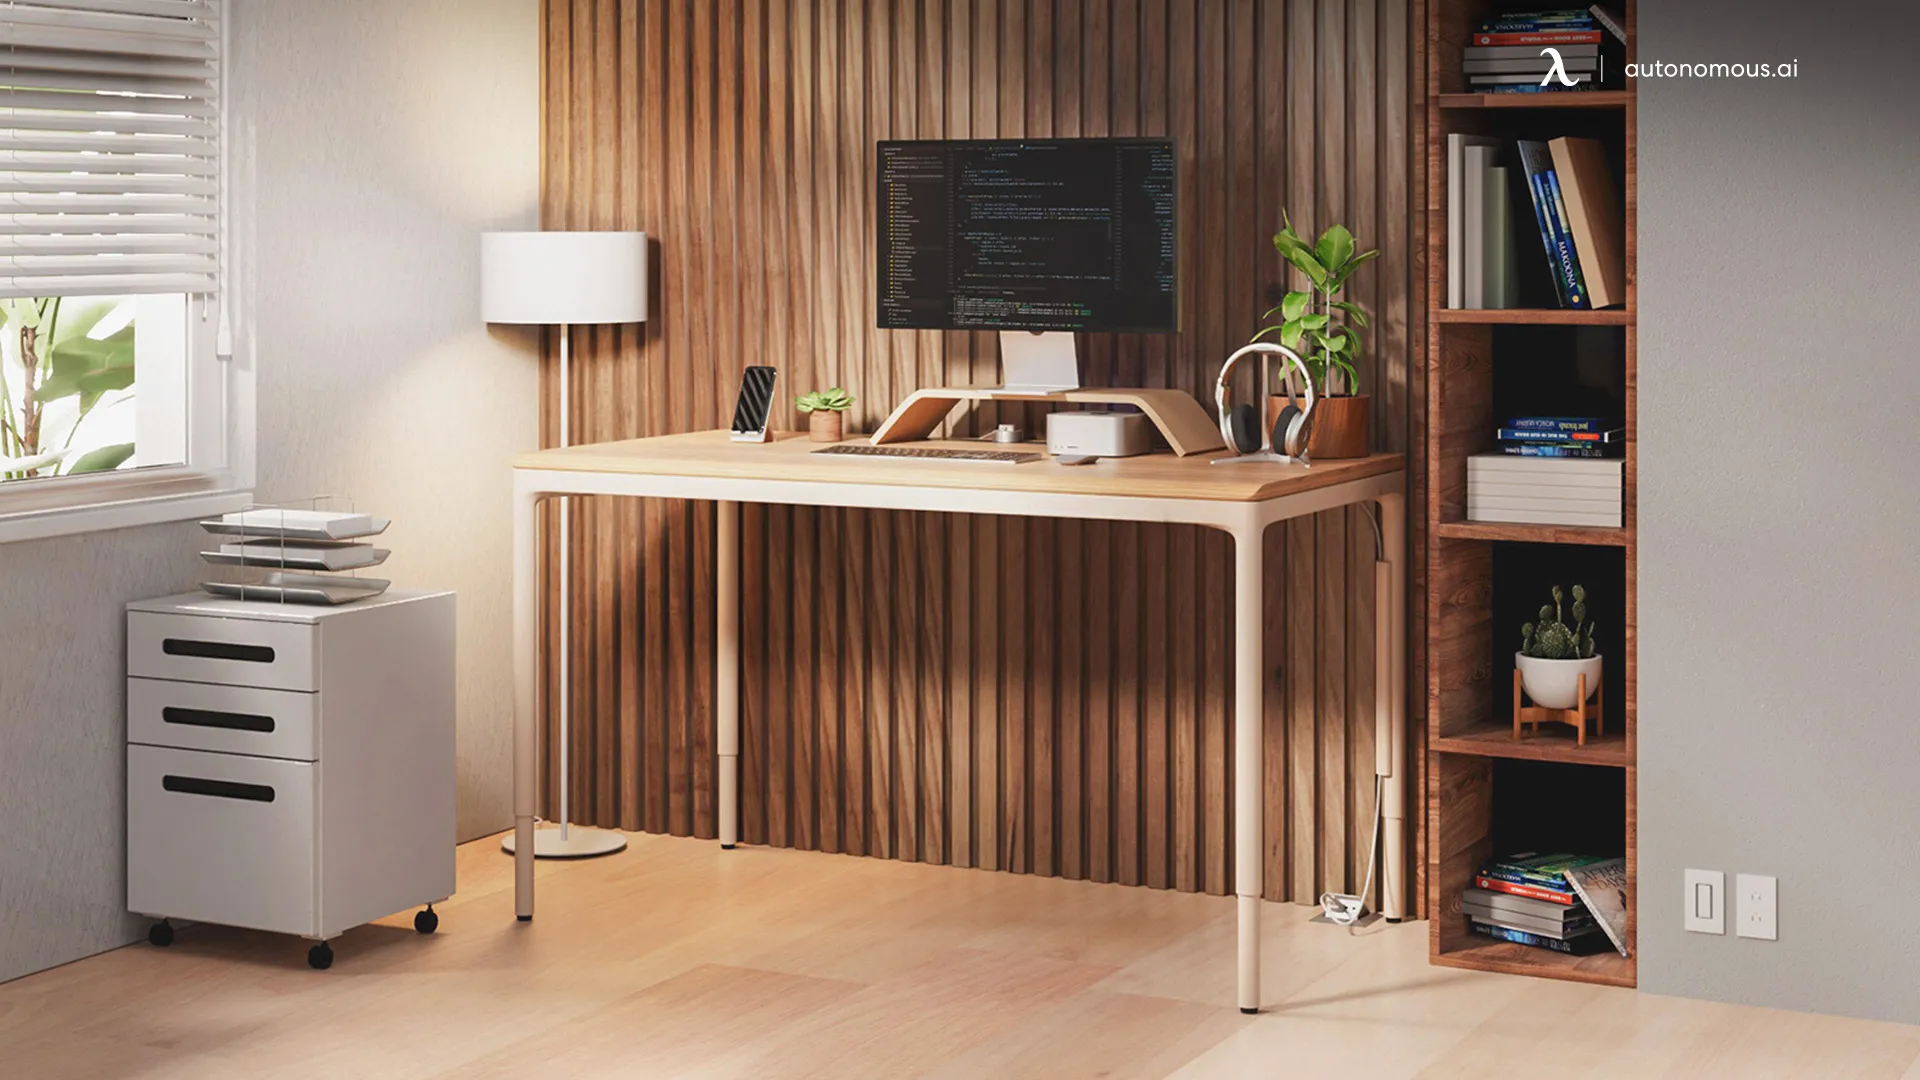 Functionality Over Frills: Practical Benefits of a Simple Office Desk